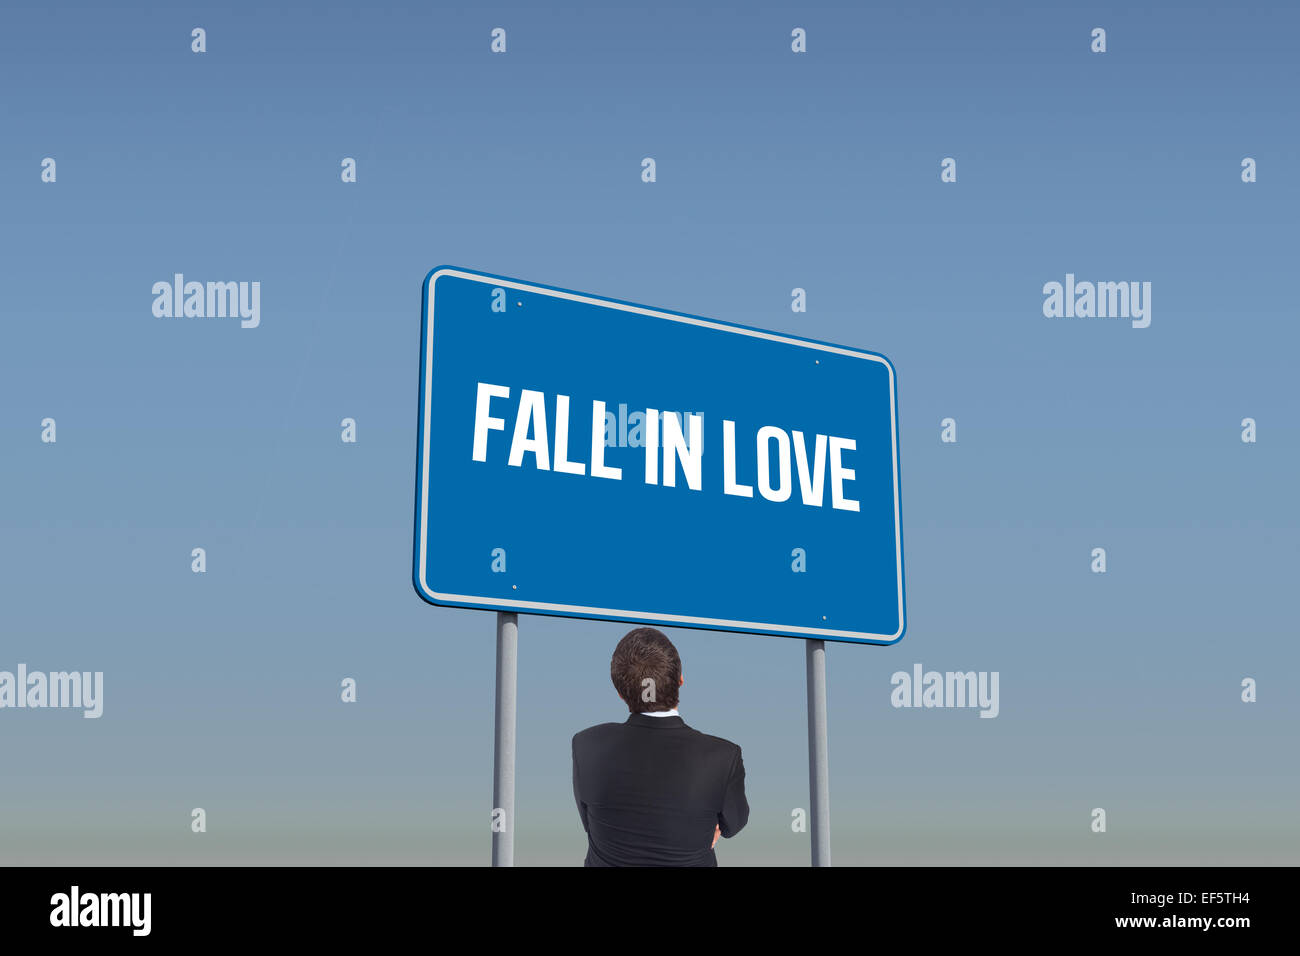 Fall in love against blue sky Stock Photo